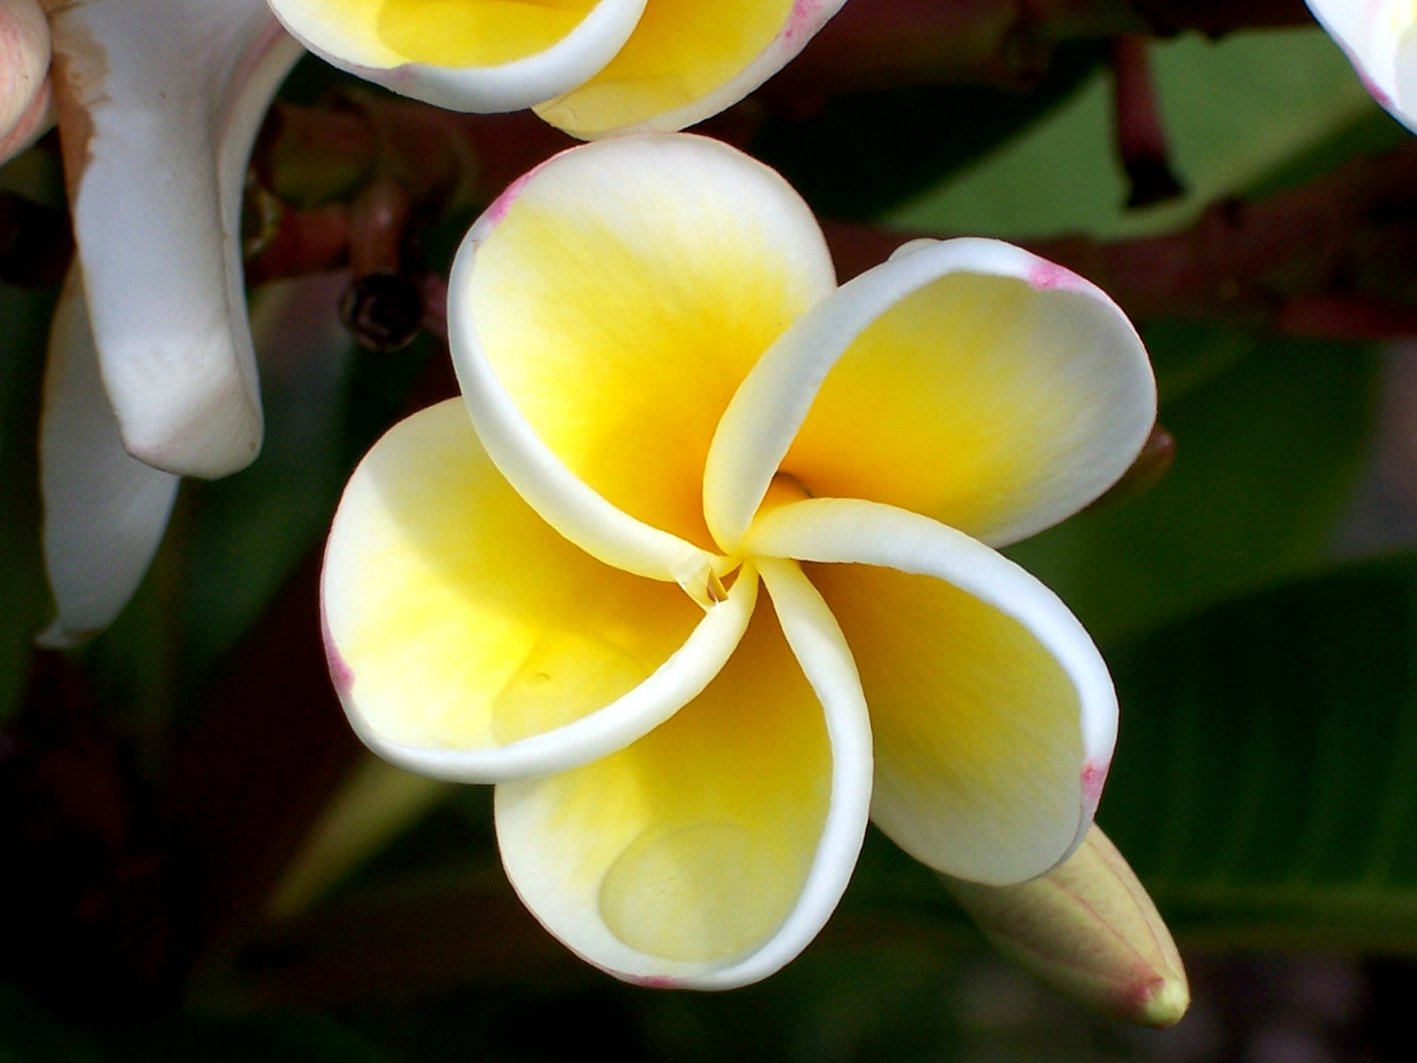 this is an image of close - up flowers with yellow petals